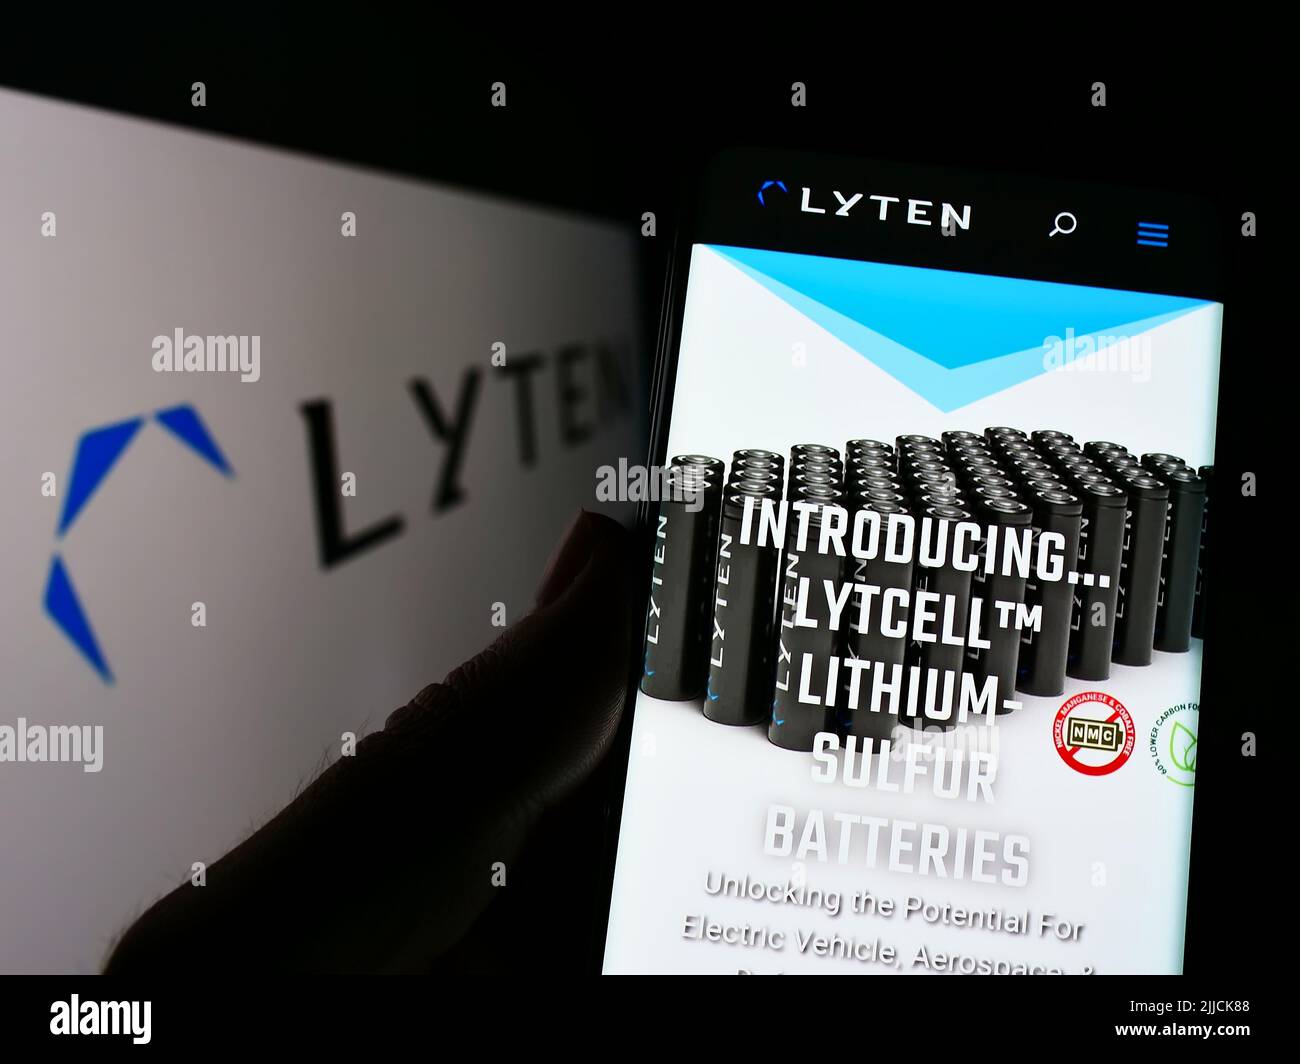 Person holding cellphone with website of US battery company Lyten Inc. on screen in front of business logo. Focus on center of phone display. Stock Photo